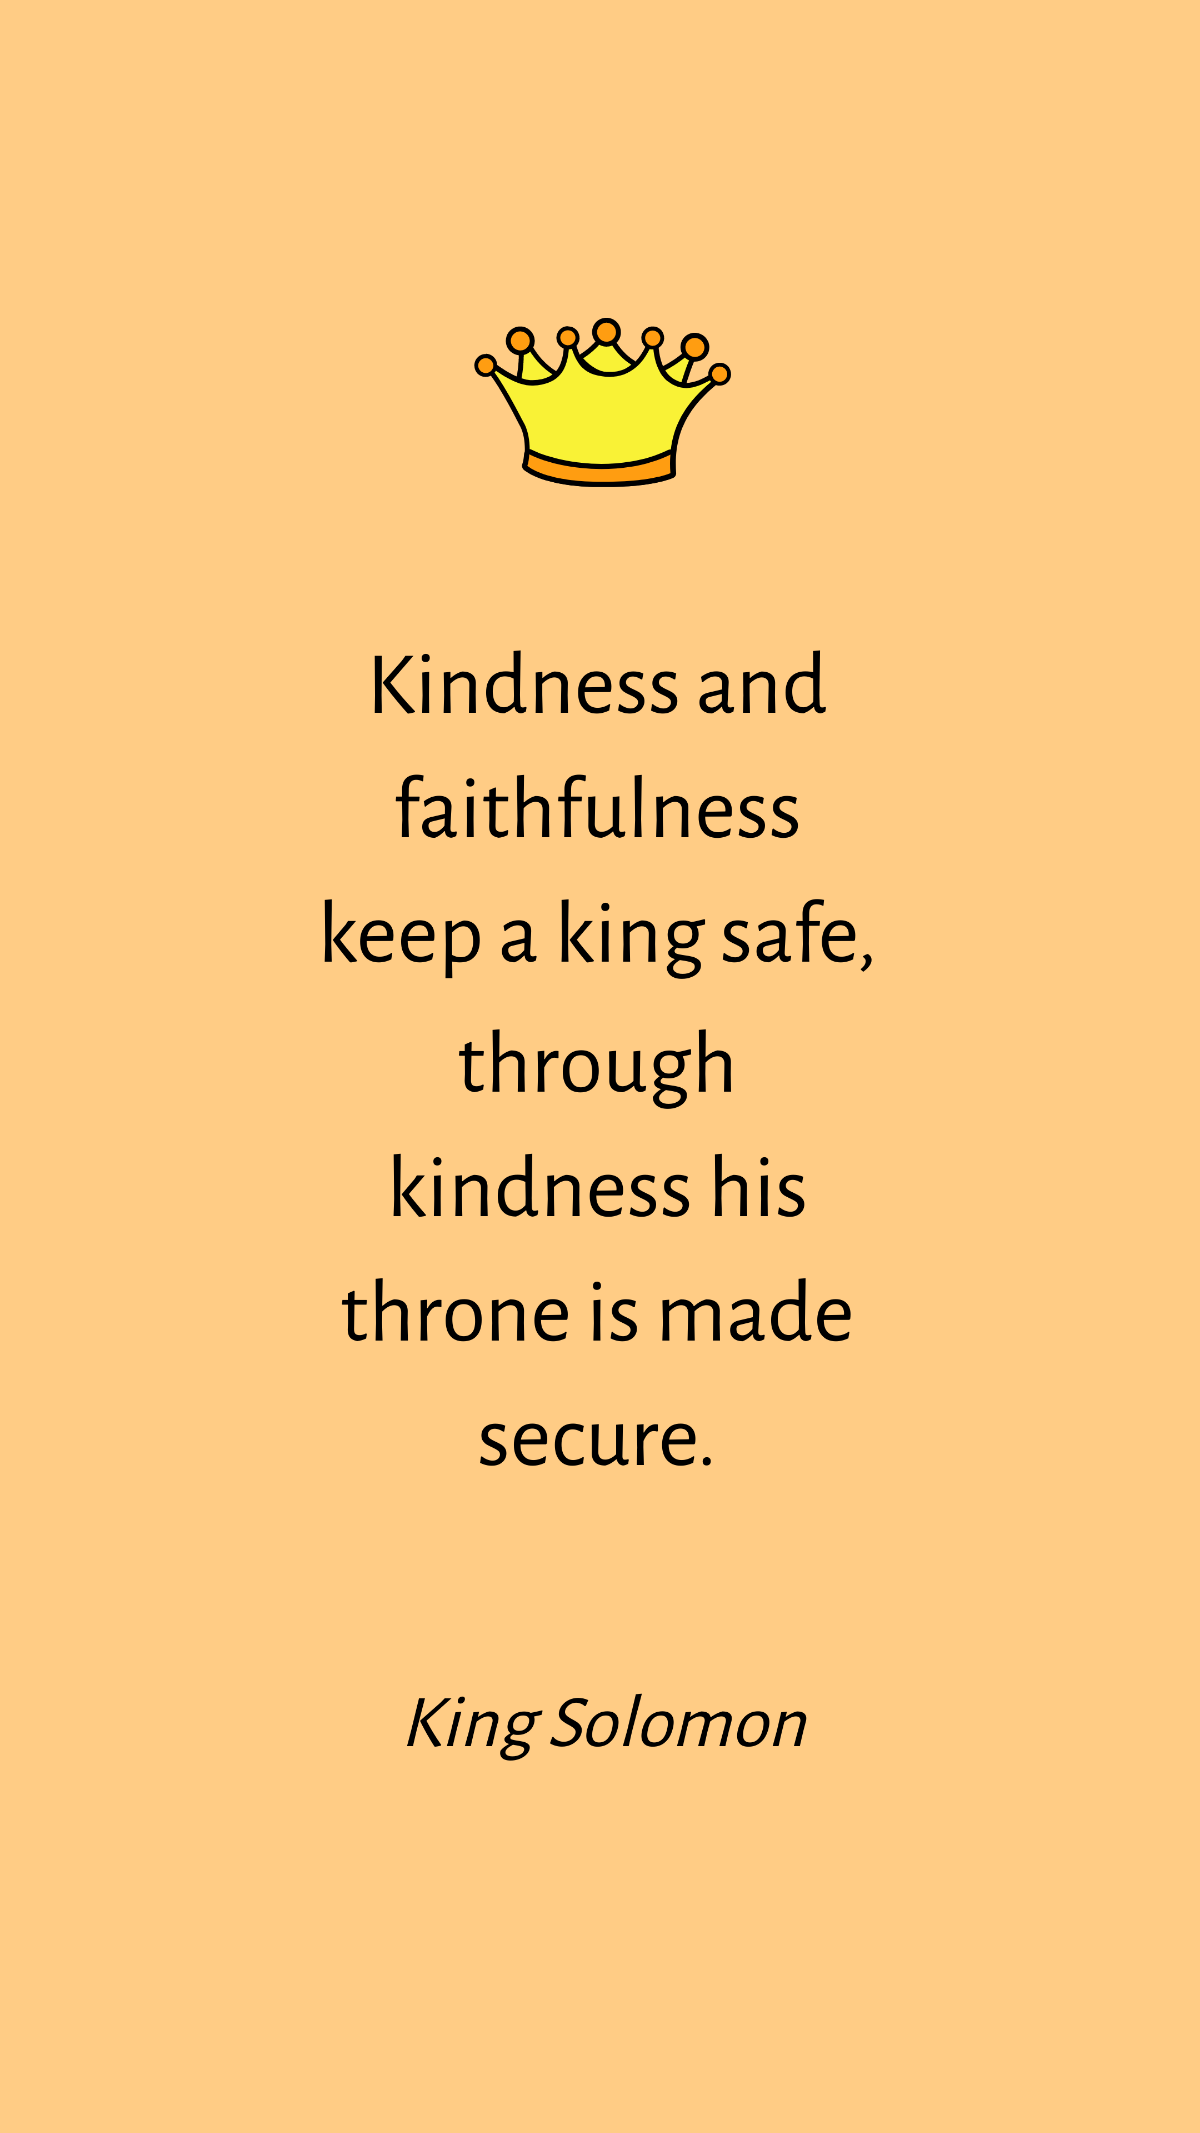 King Solomon - Kindness and faithfulness keep a king safe, through kindness his throne is made secure. Template